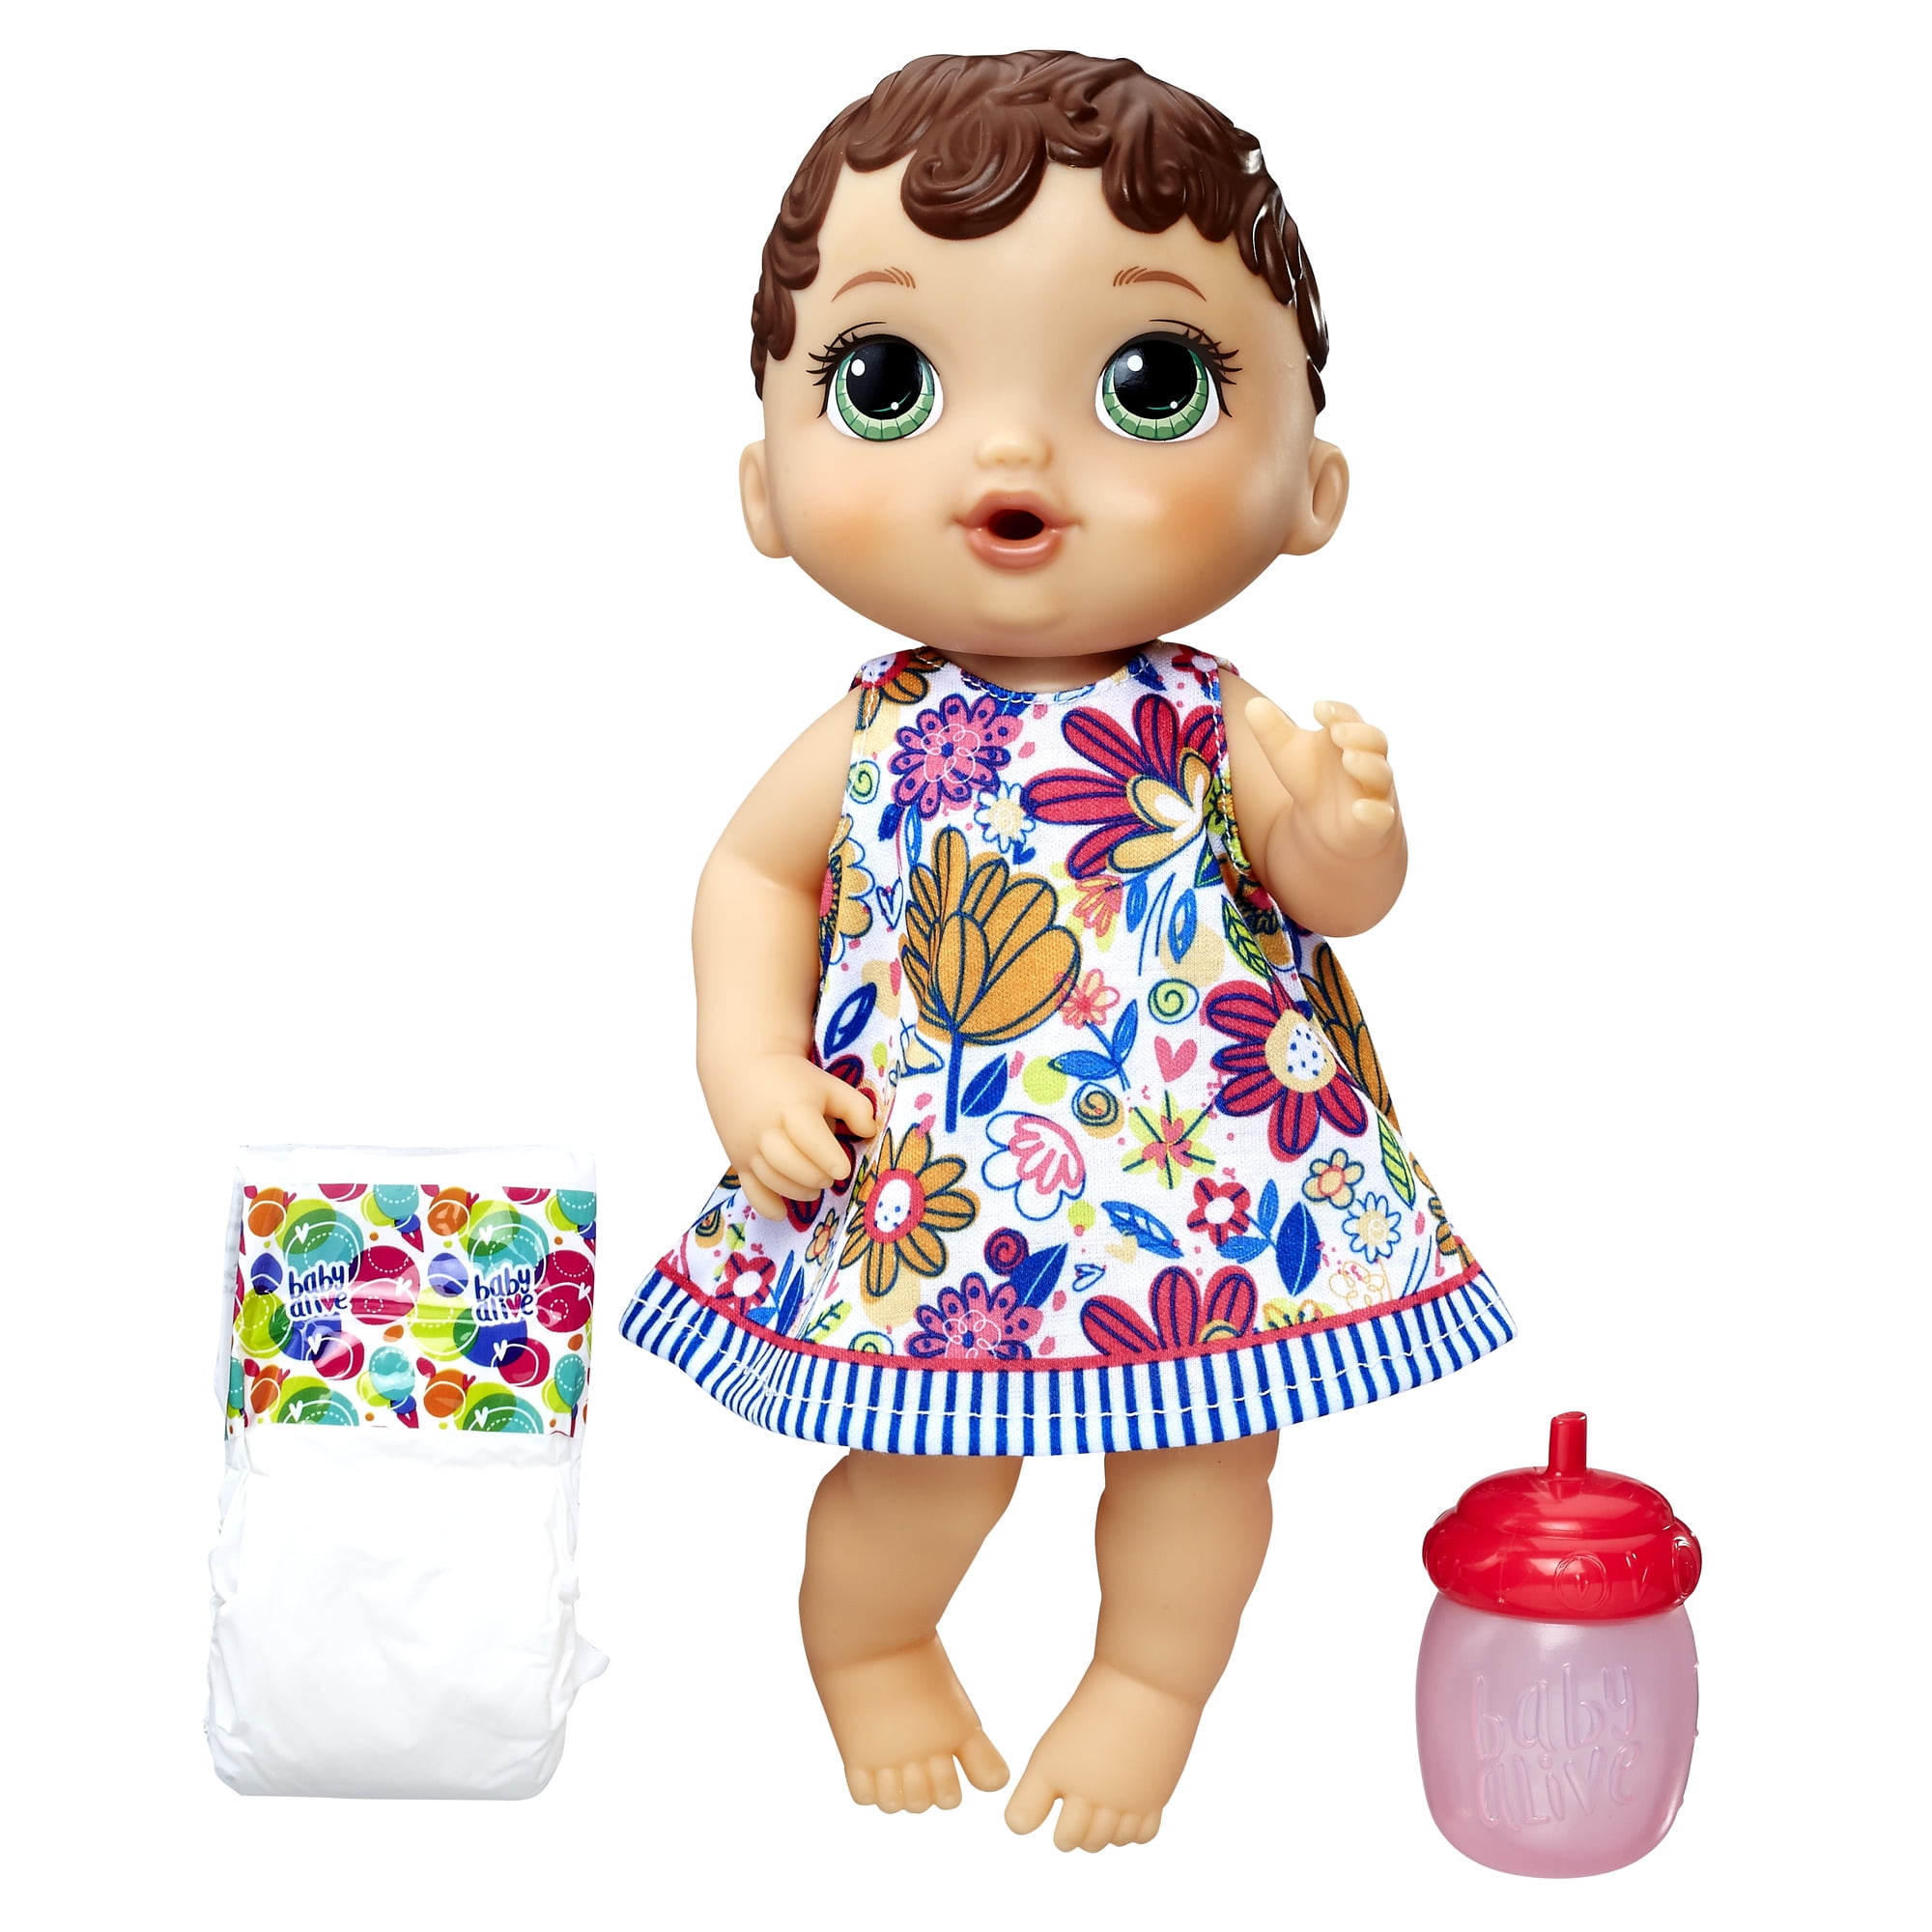 Baby Alive Lil' Sips Baby Doll, Brown 